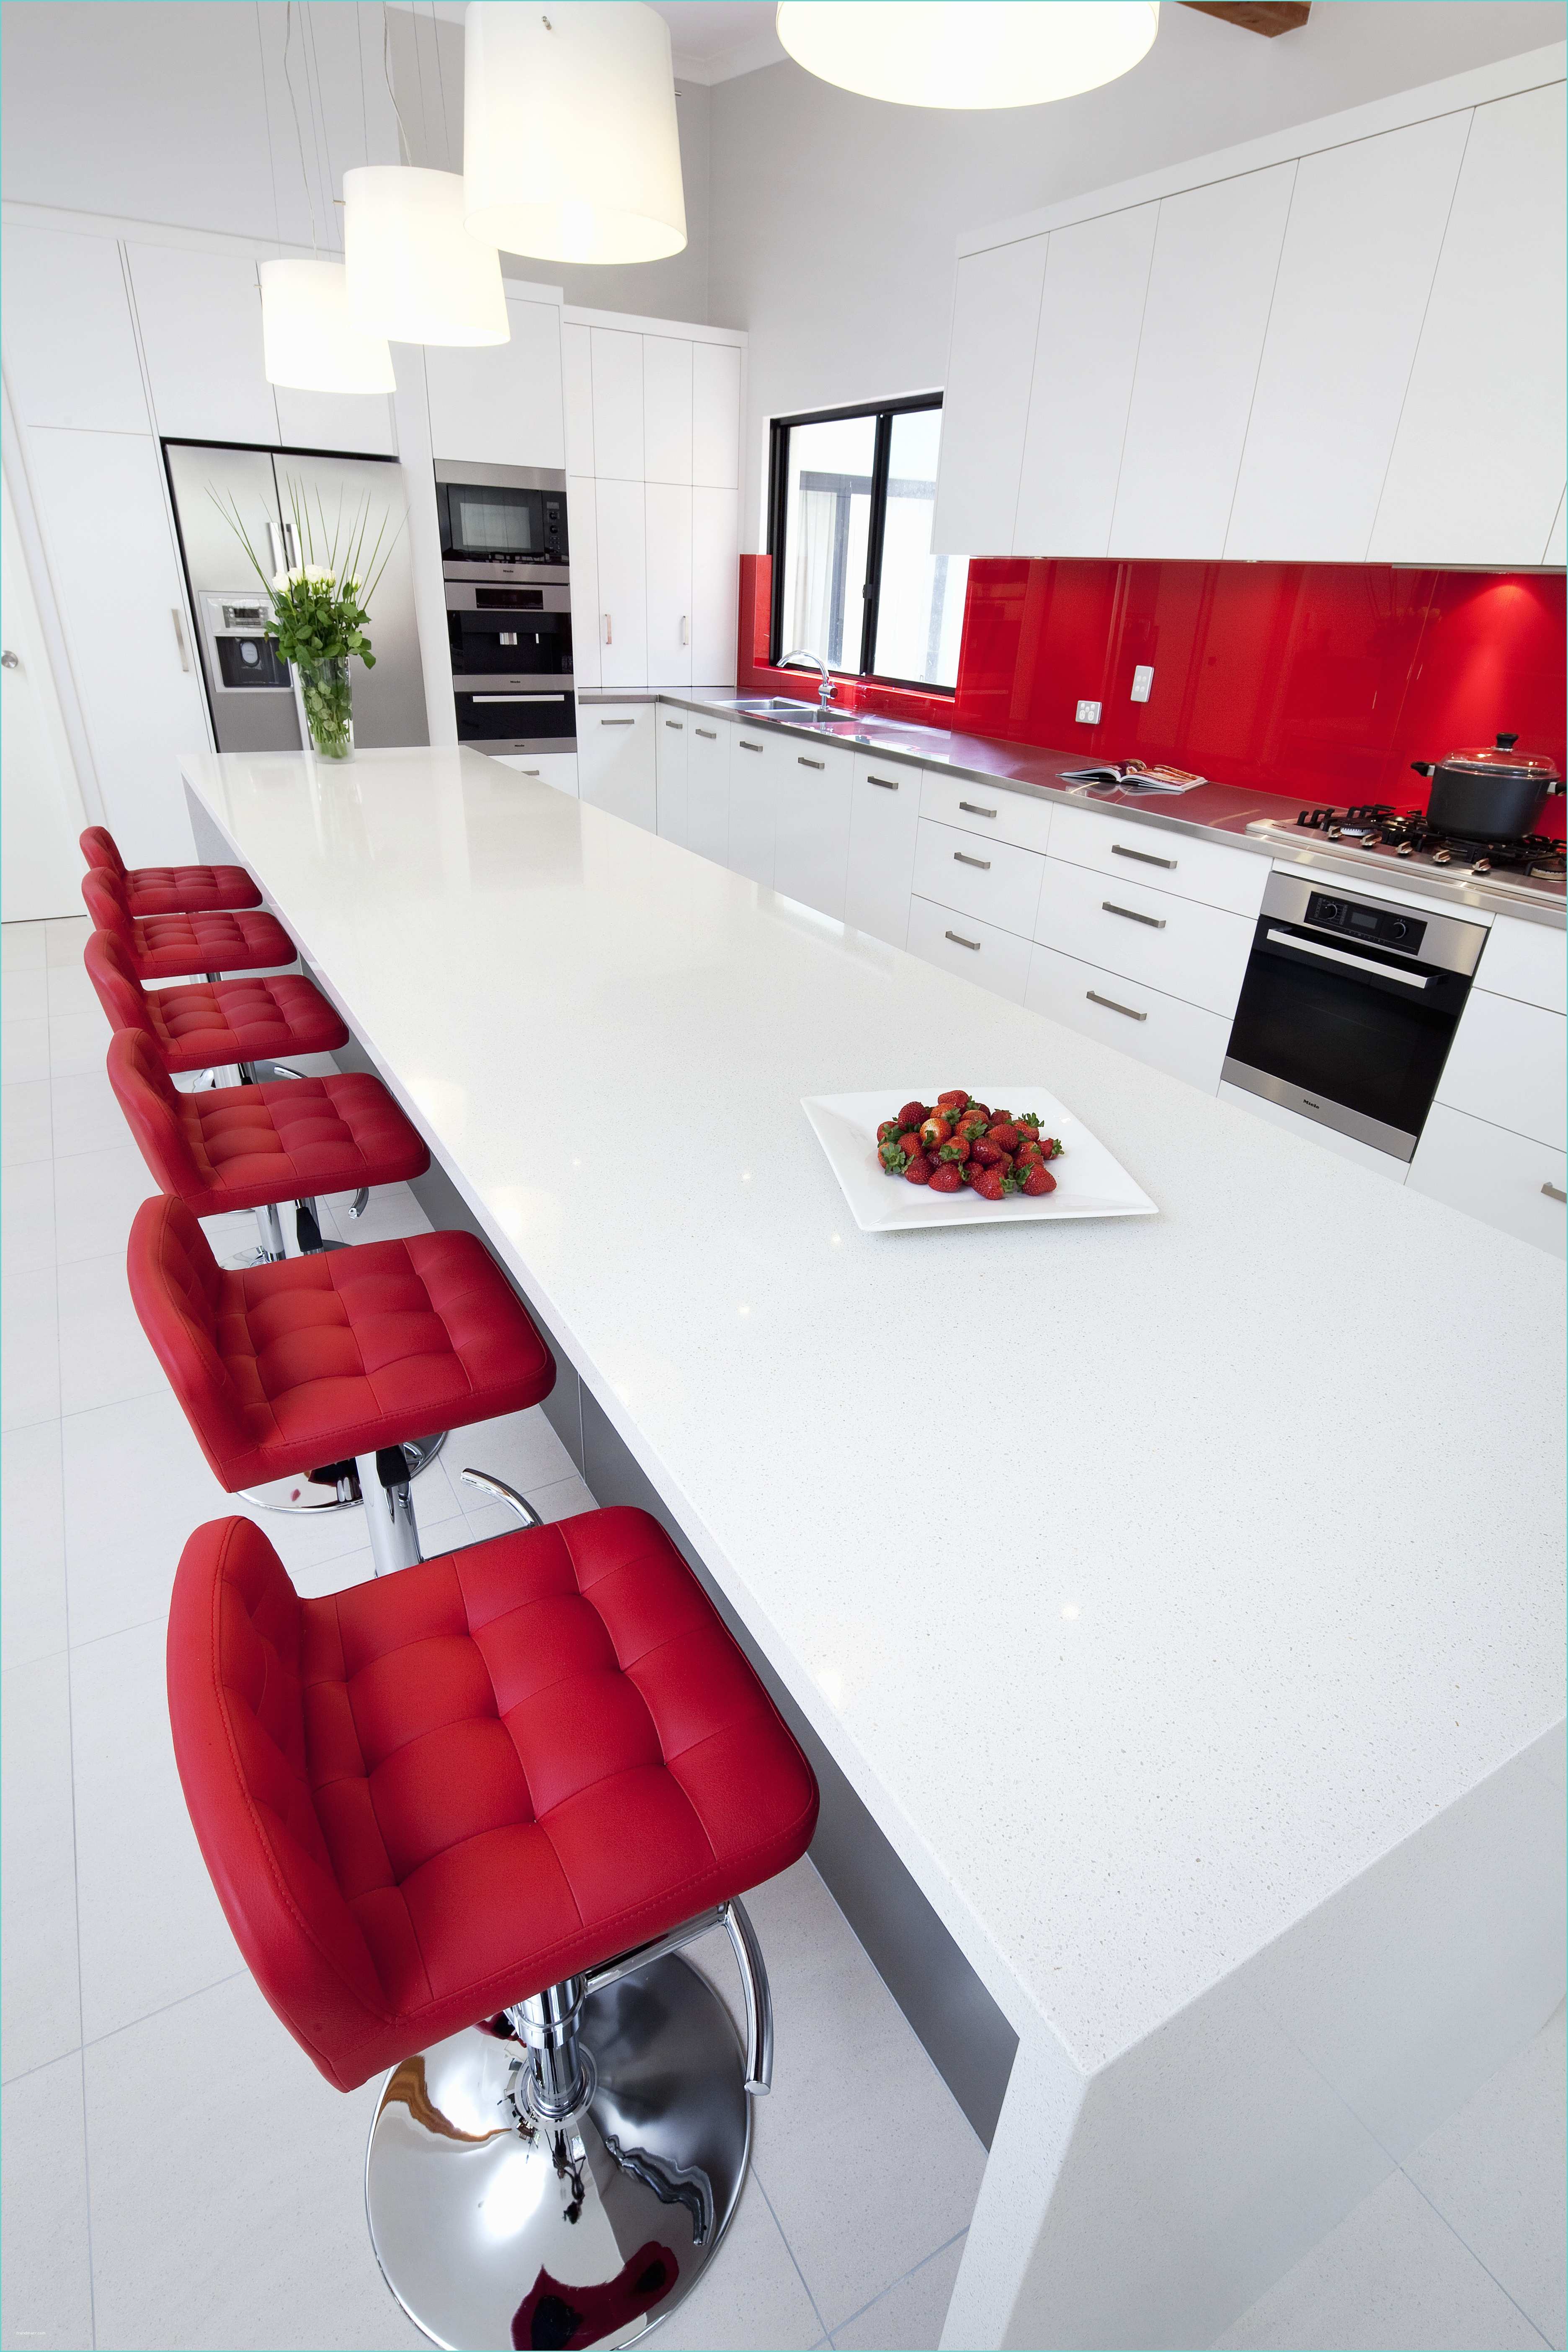 Kitchen Factory Malaga Kitchens Designed by the Kitchen Factory Malaga